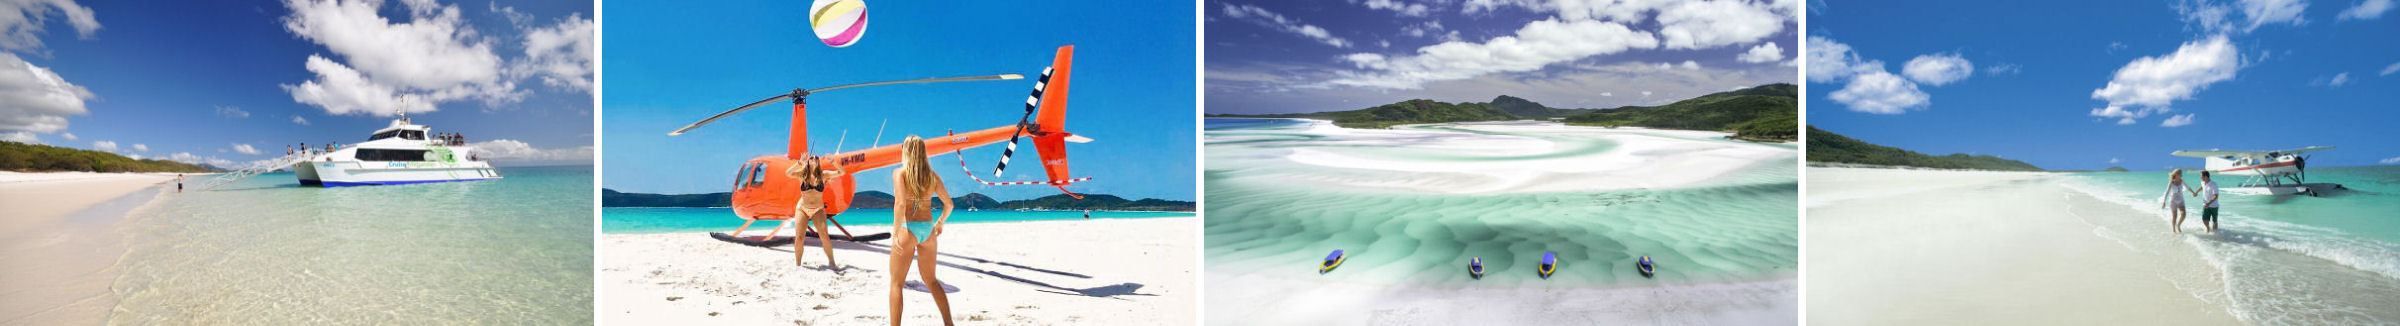 Whitehaven Beach - How to get there